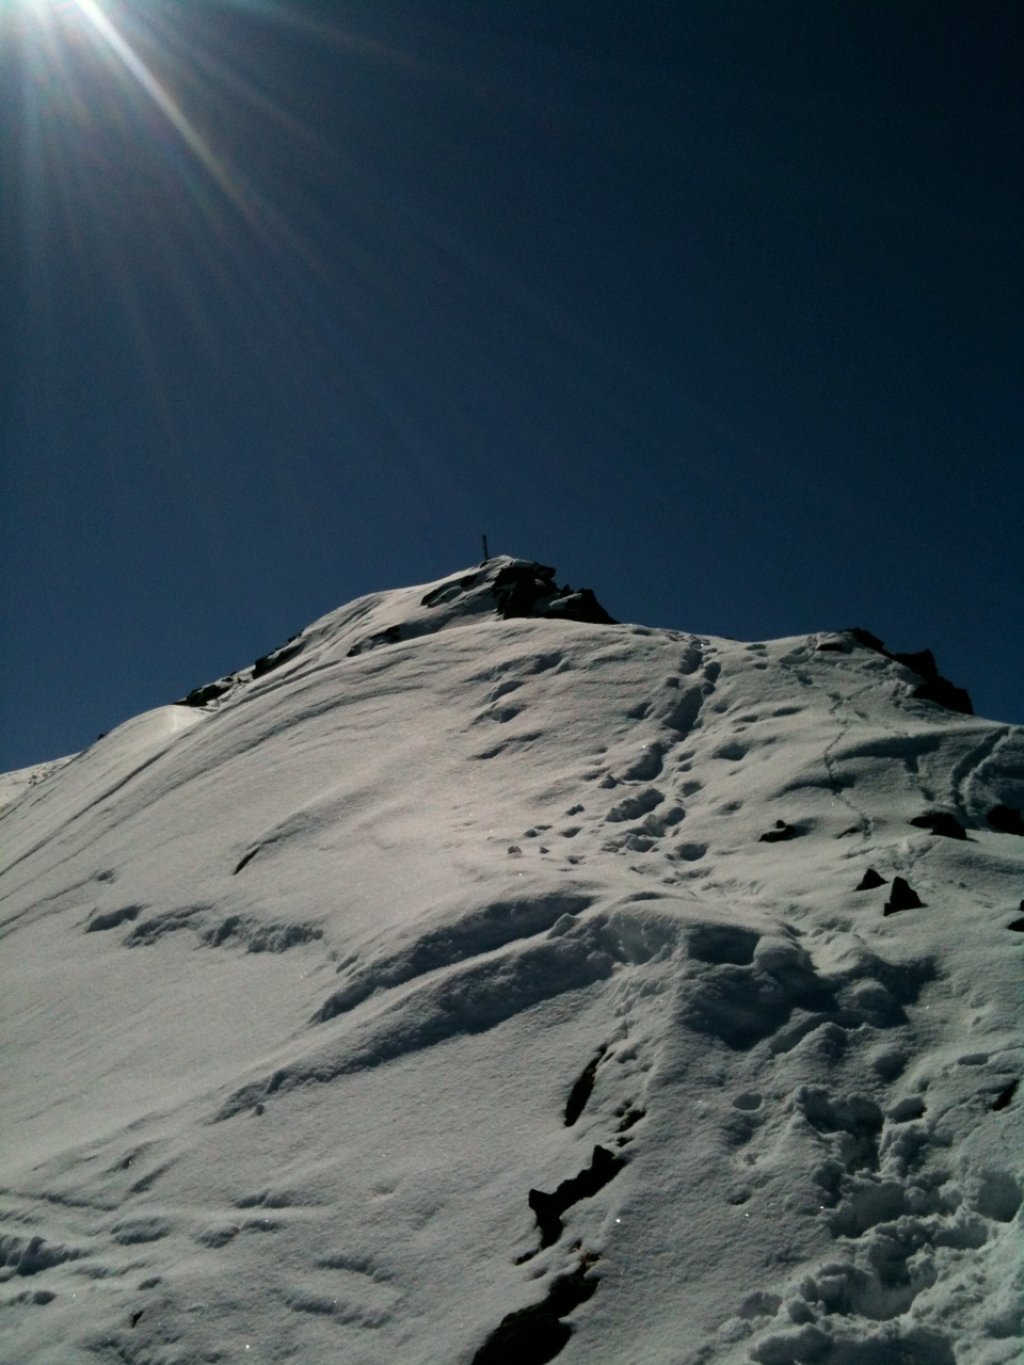 Shortly before the summit